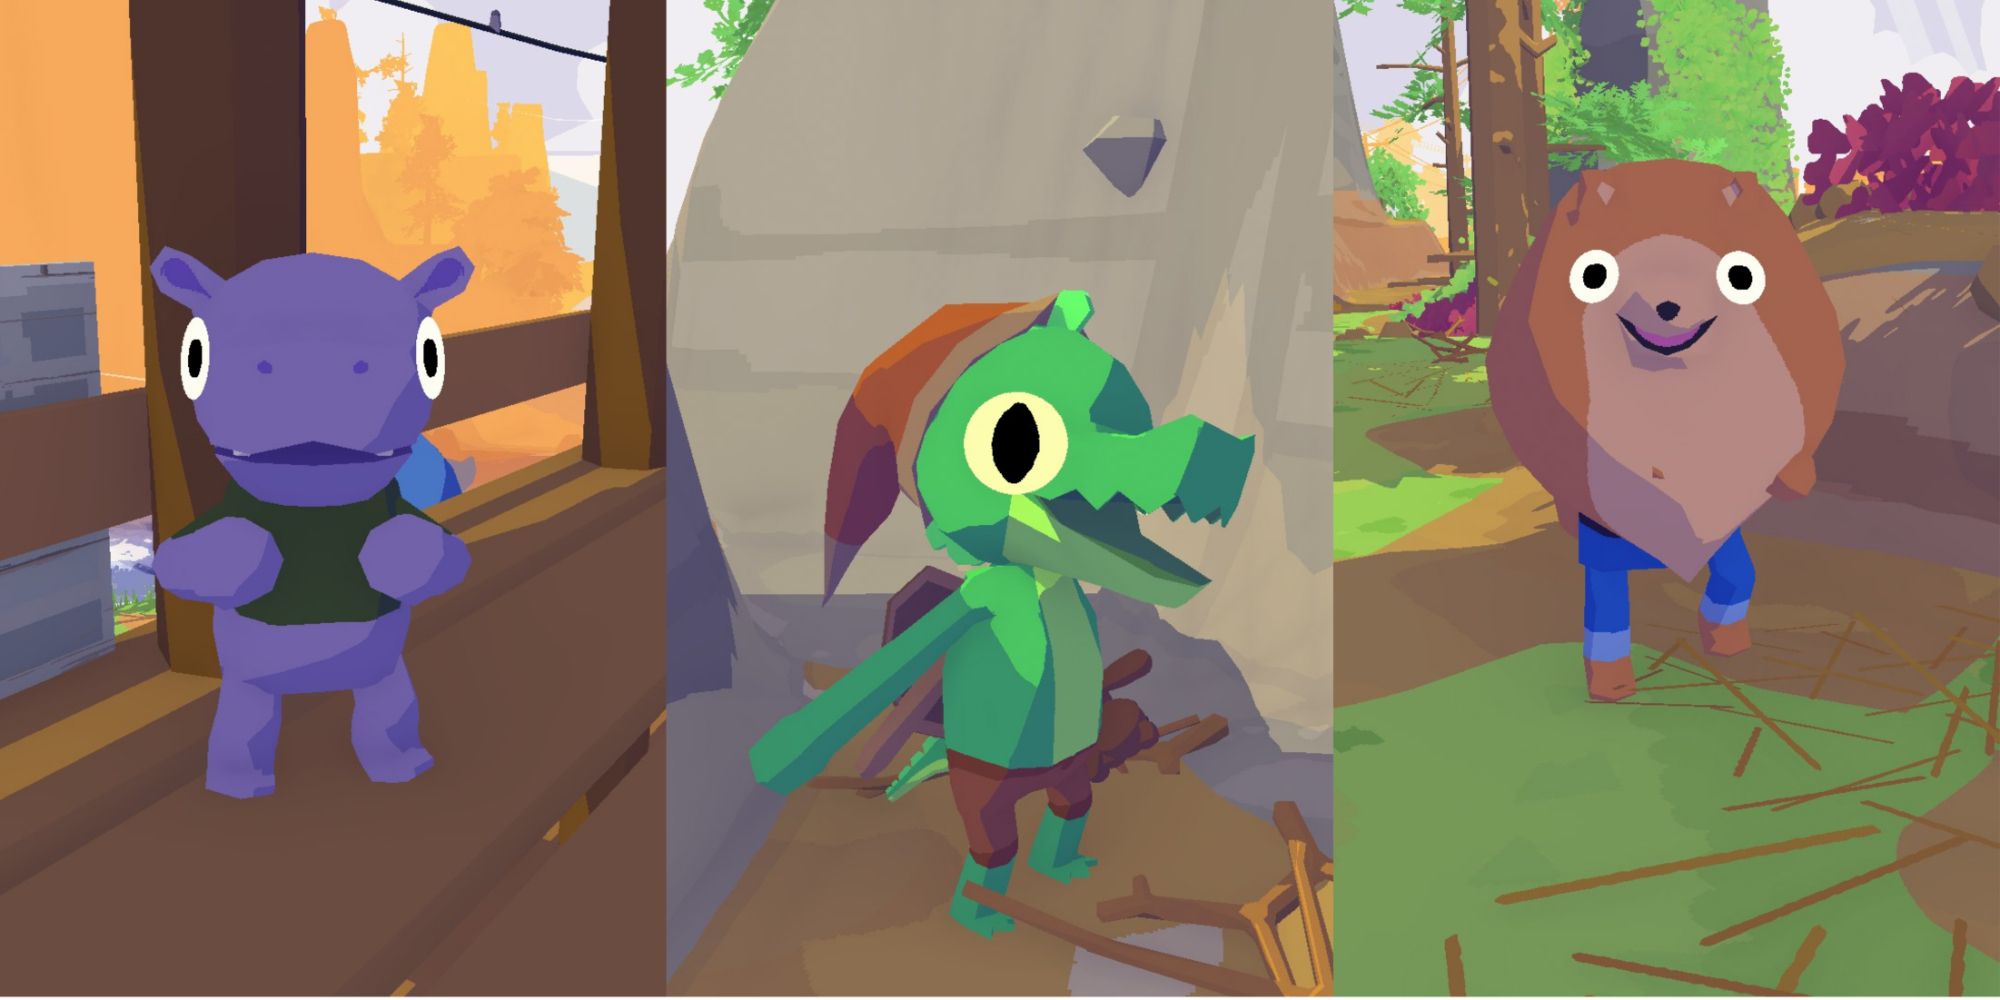 Featured image of Lil Gator Game characters Gunther, Lil Gator, and Twig